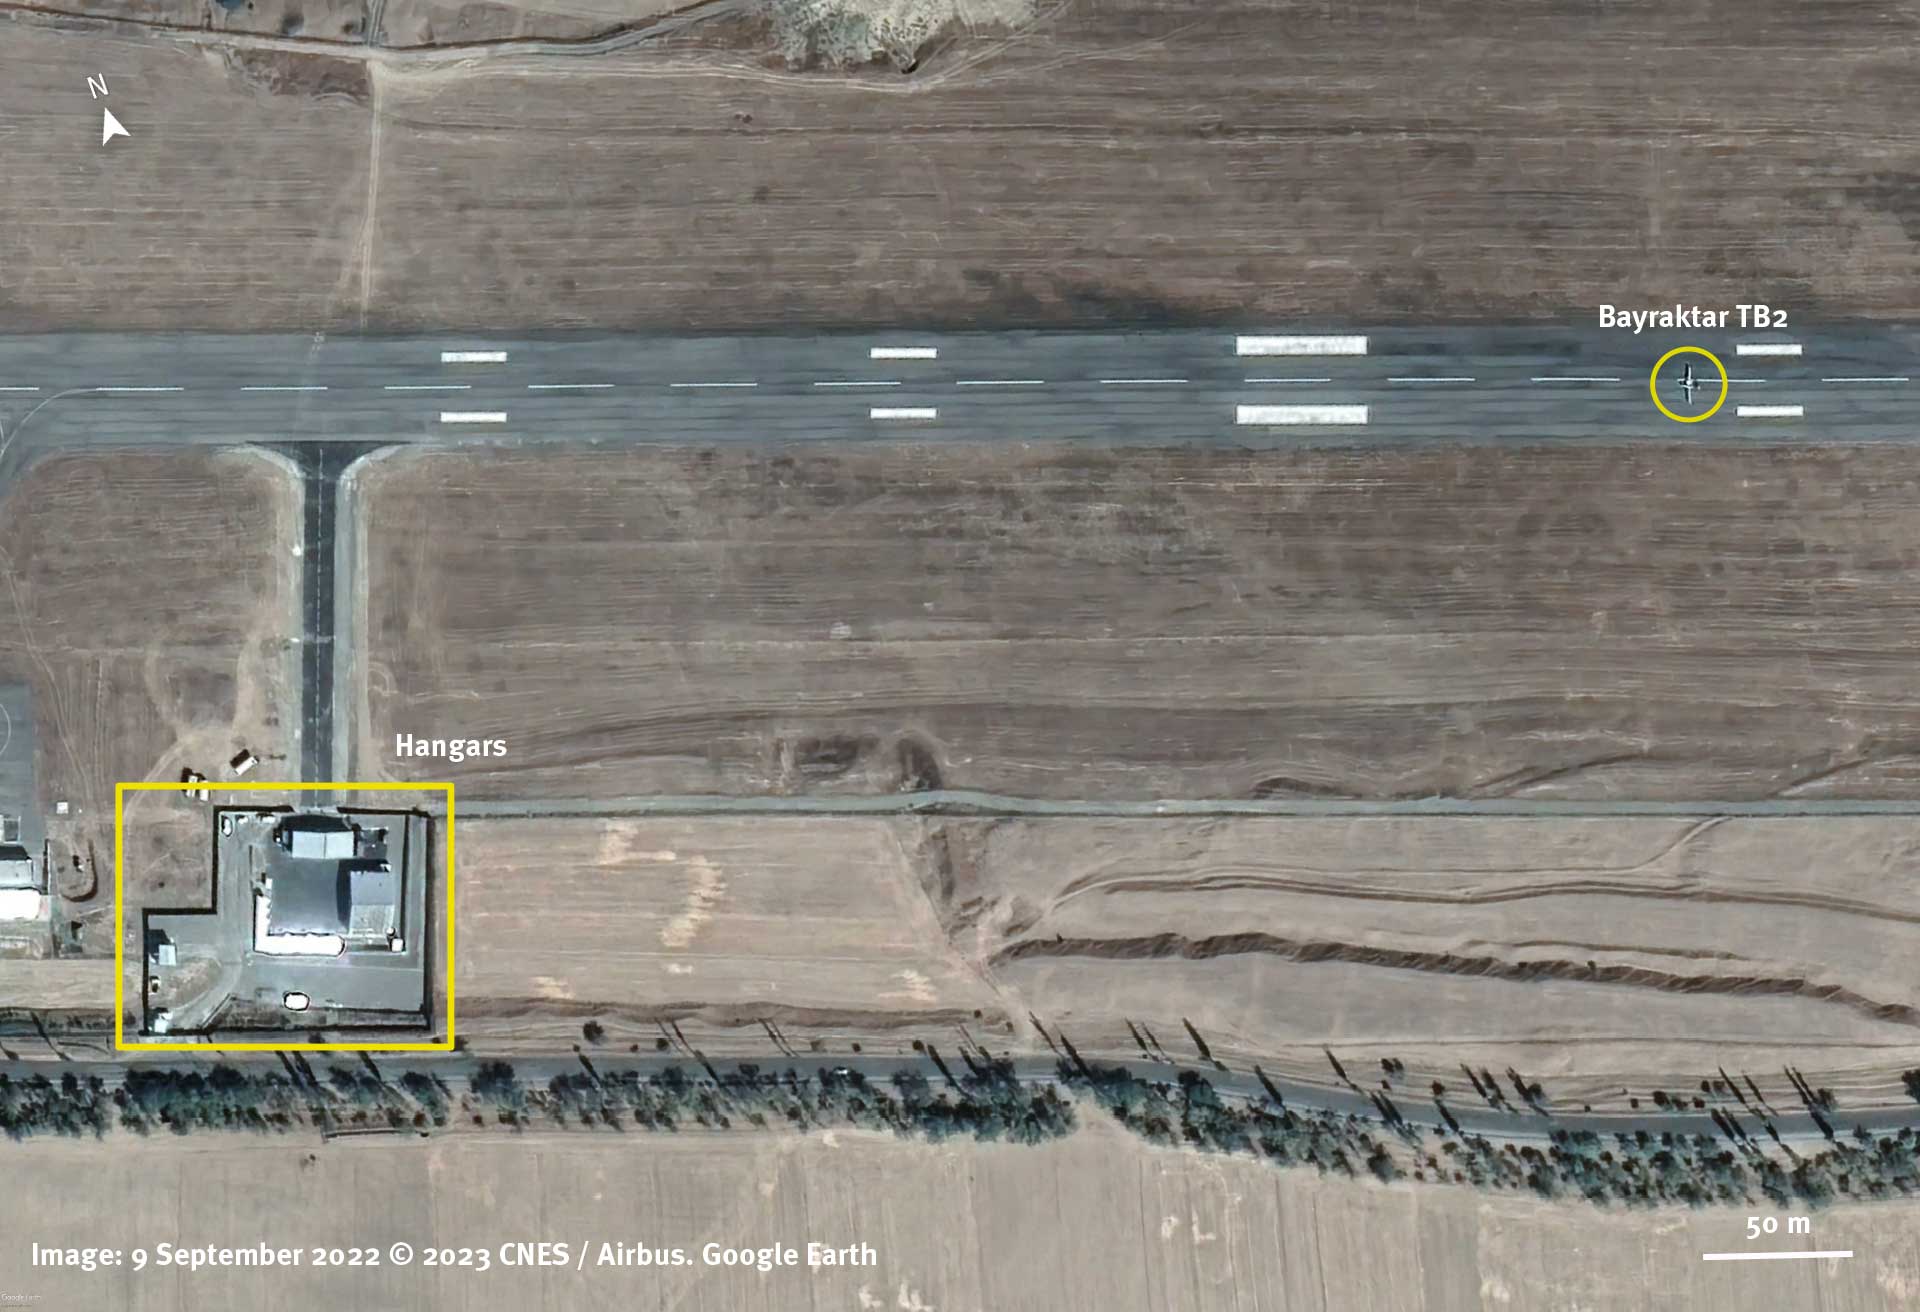 Publicly available satellite imagery recorded on September 9, 2022, a week before the deadly drone strike on Ovchi Kal’acha, shows a Bayraktar TB-2 drone and a hangar large enough for the drone at the Kyrgyzstan airbase of Razzaqov (formerly known as Isfana).